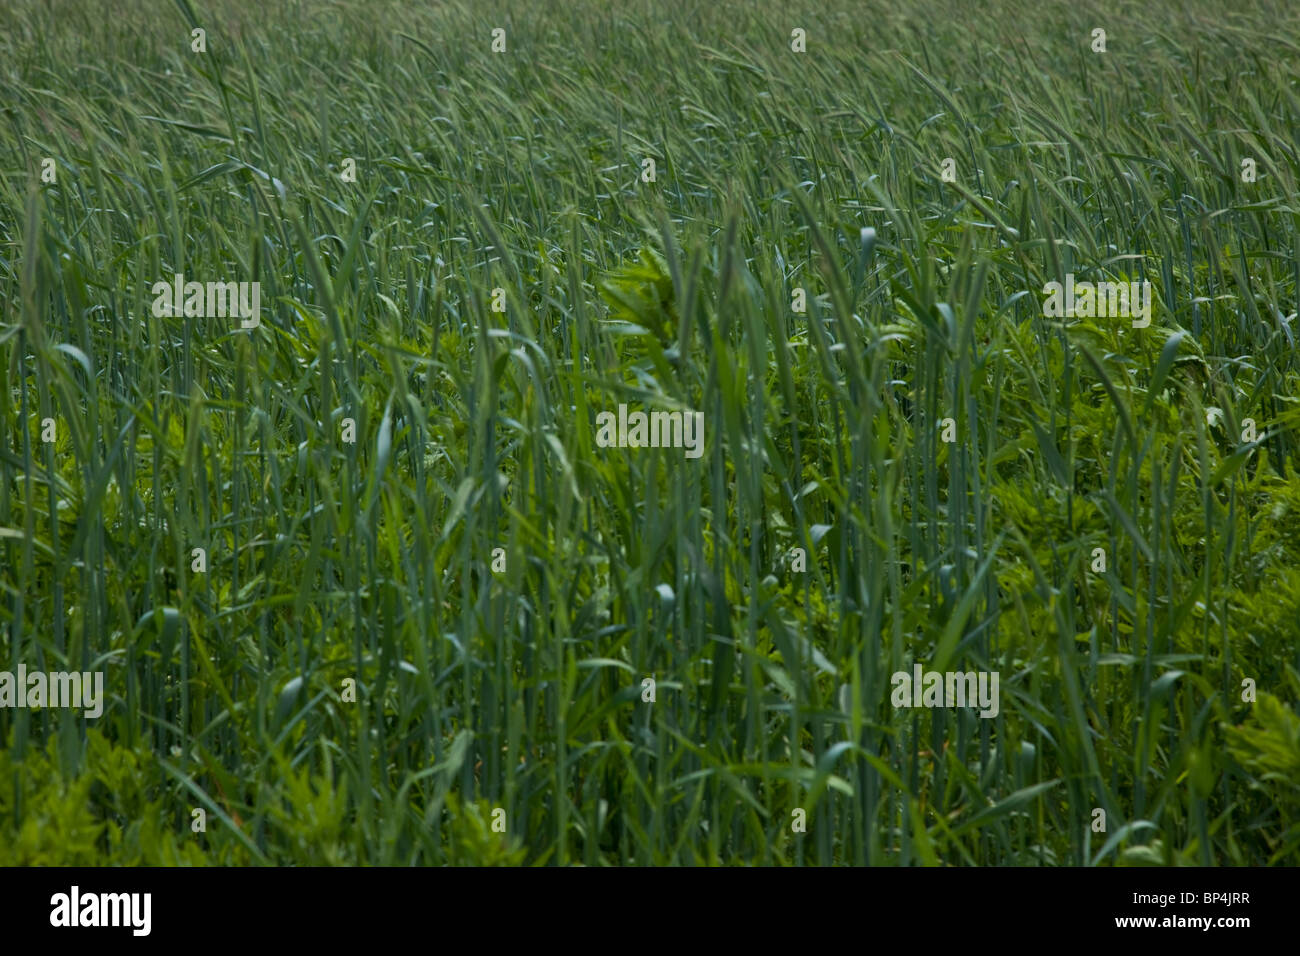 Rye (Secale cereale) is a grass grown extensively as a grain and as a forage crop. It is a member of the wheat tribe (Triticeae) Stock Photo